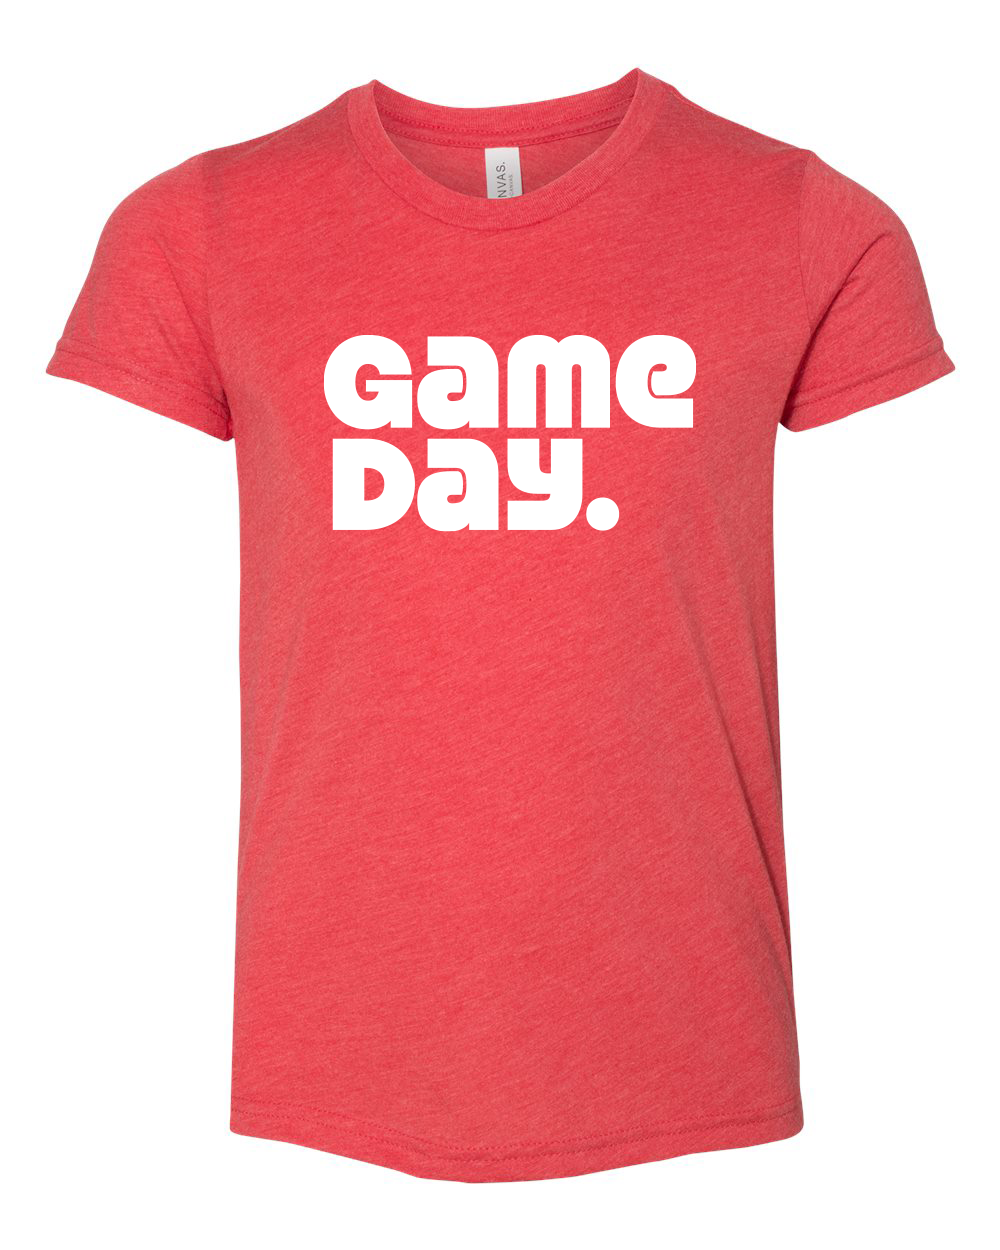 Graphic Tee - Game Day Red/White